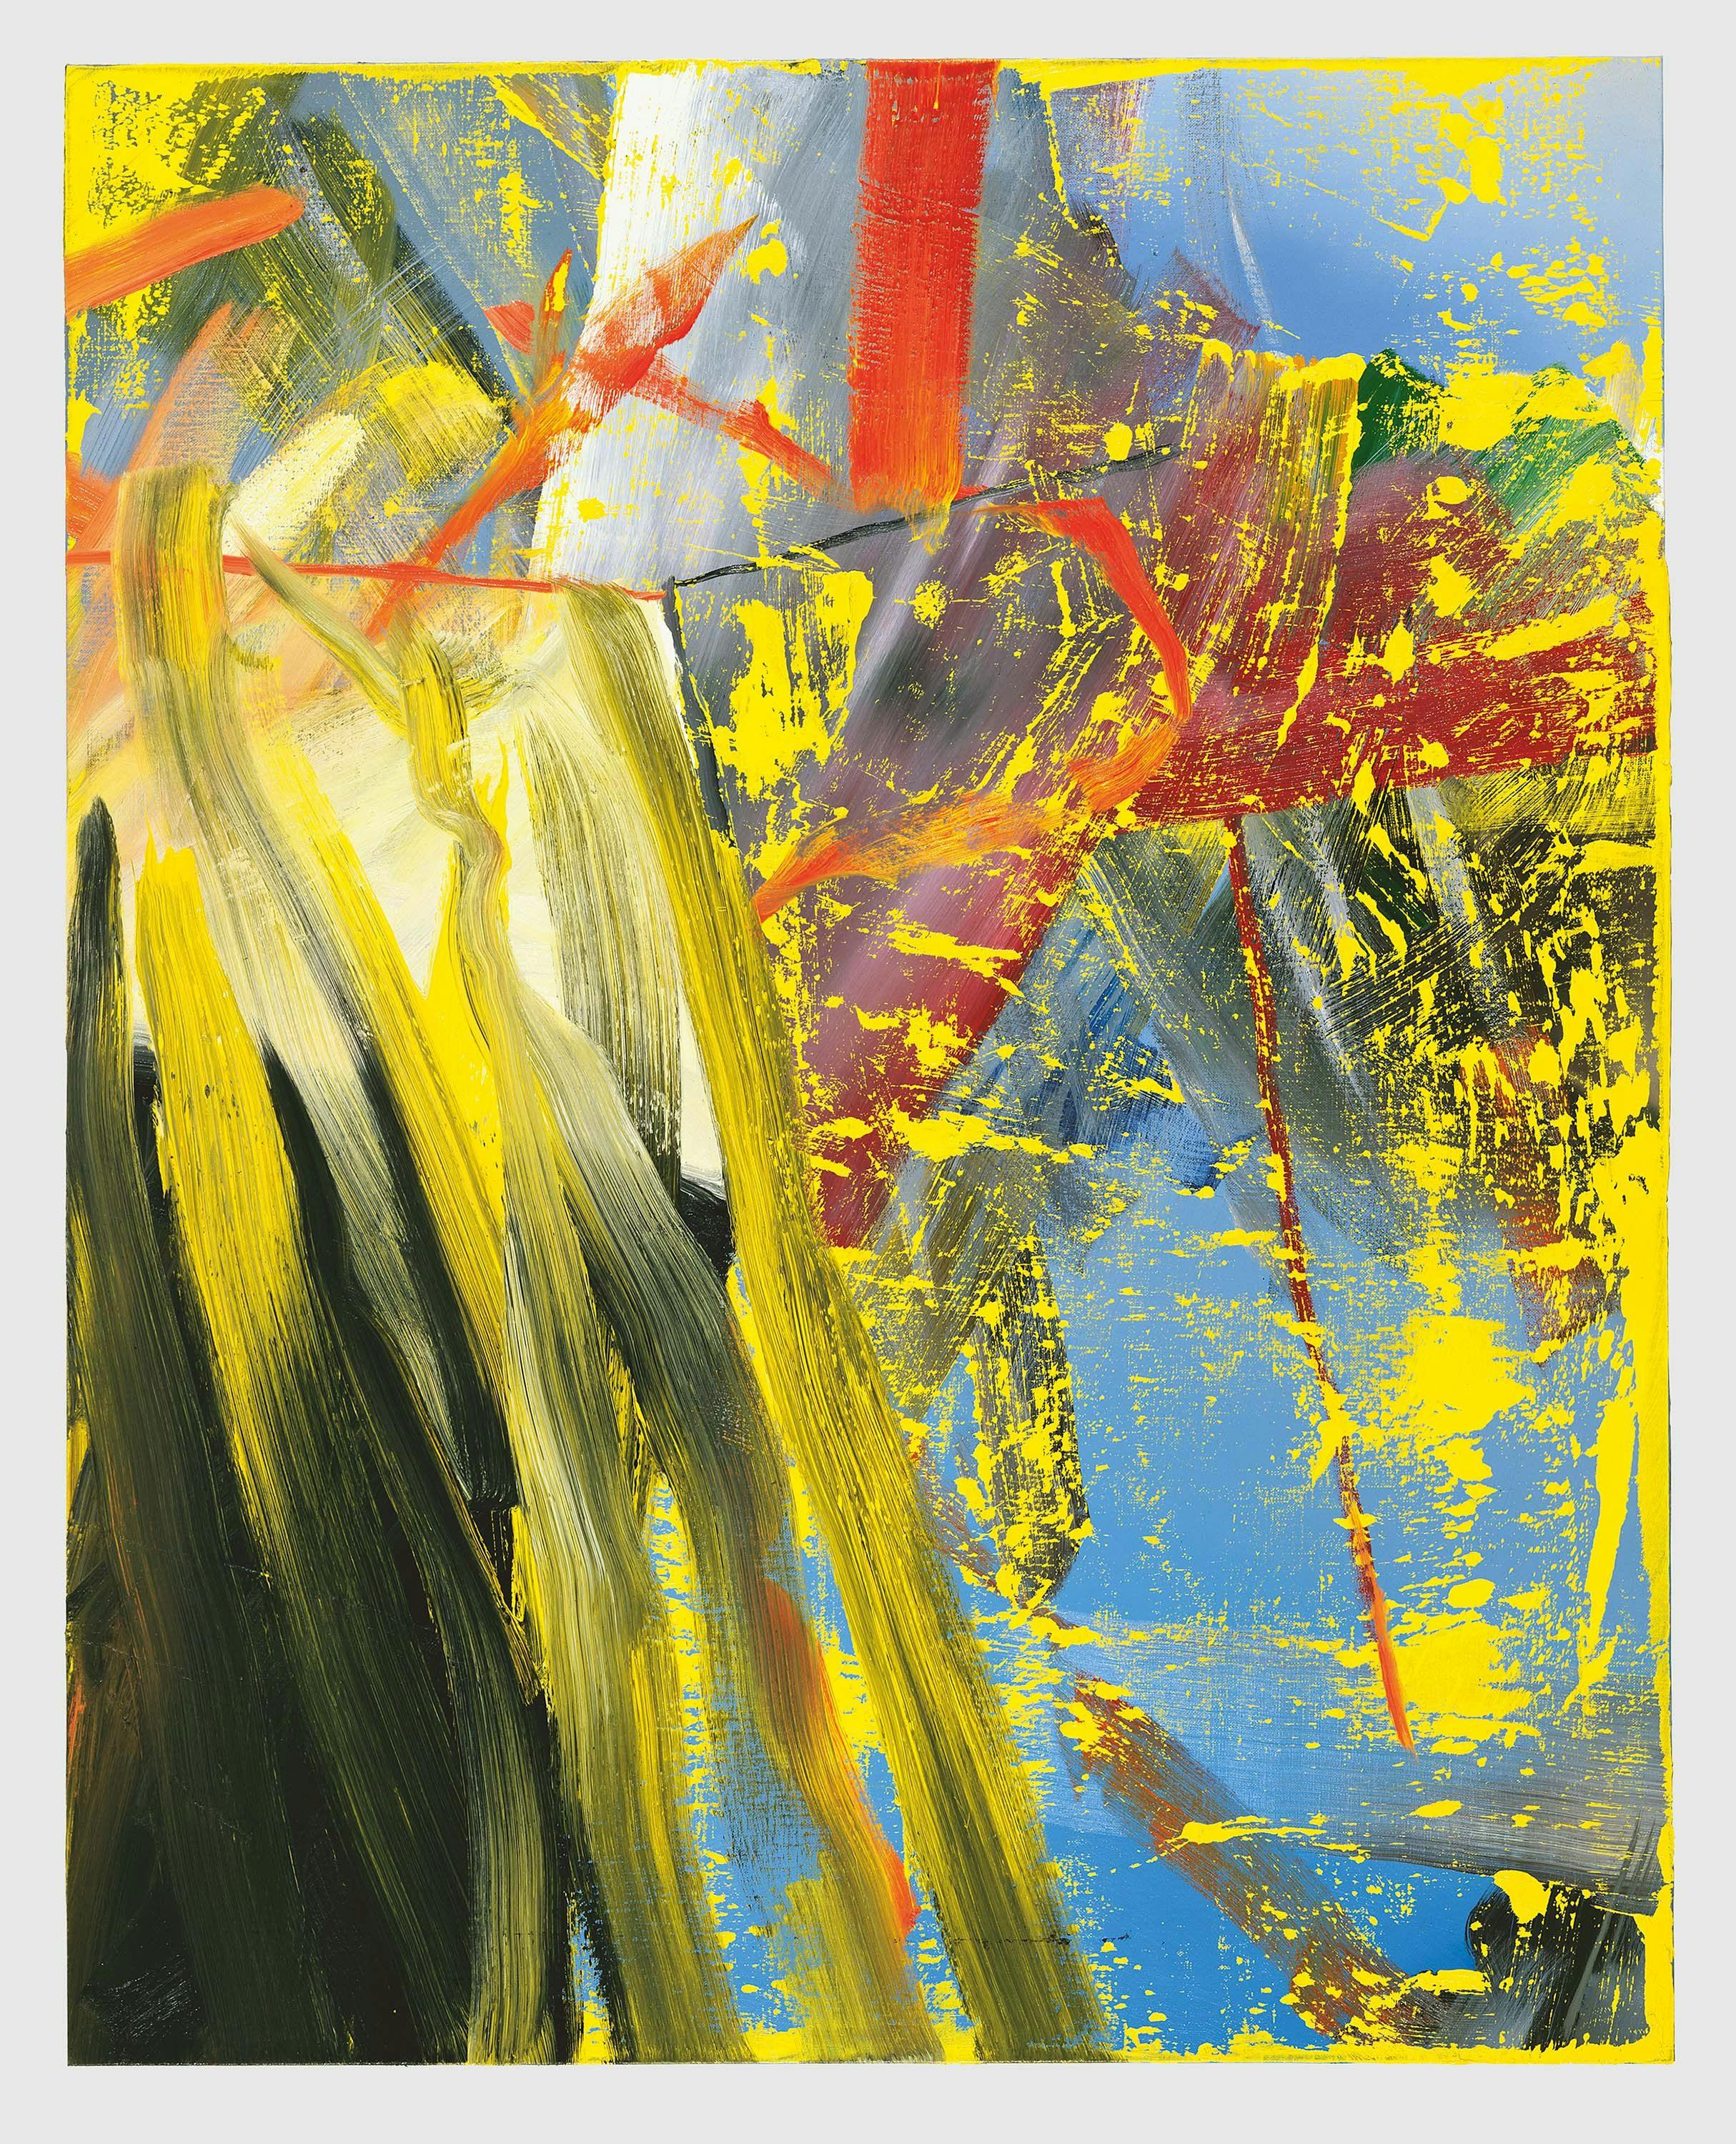 A painting by Gerhard Richter, titled Abstraktes Bild (Abstract Painting), dated 1984.